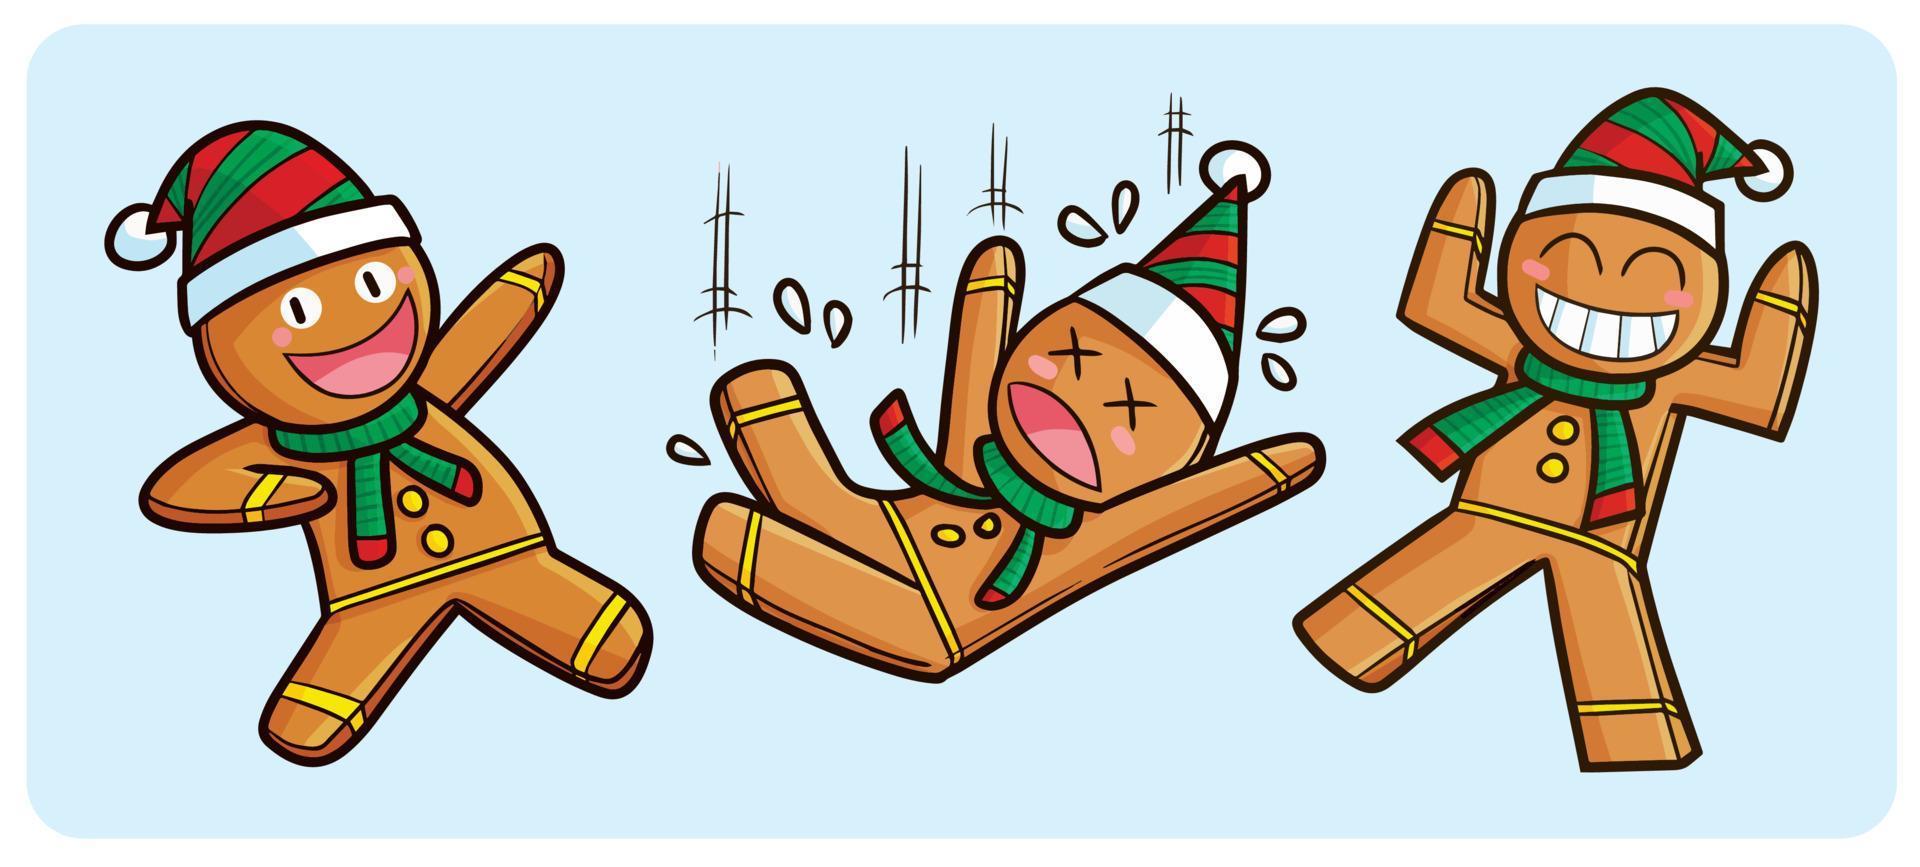 Funny ginger bread cartoon in many poses vector